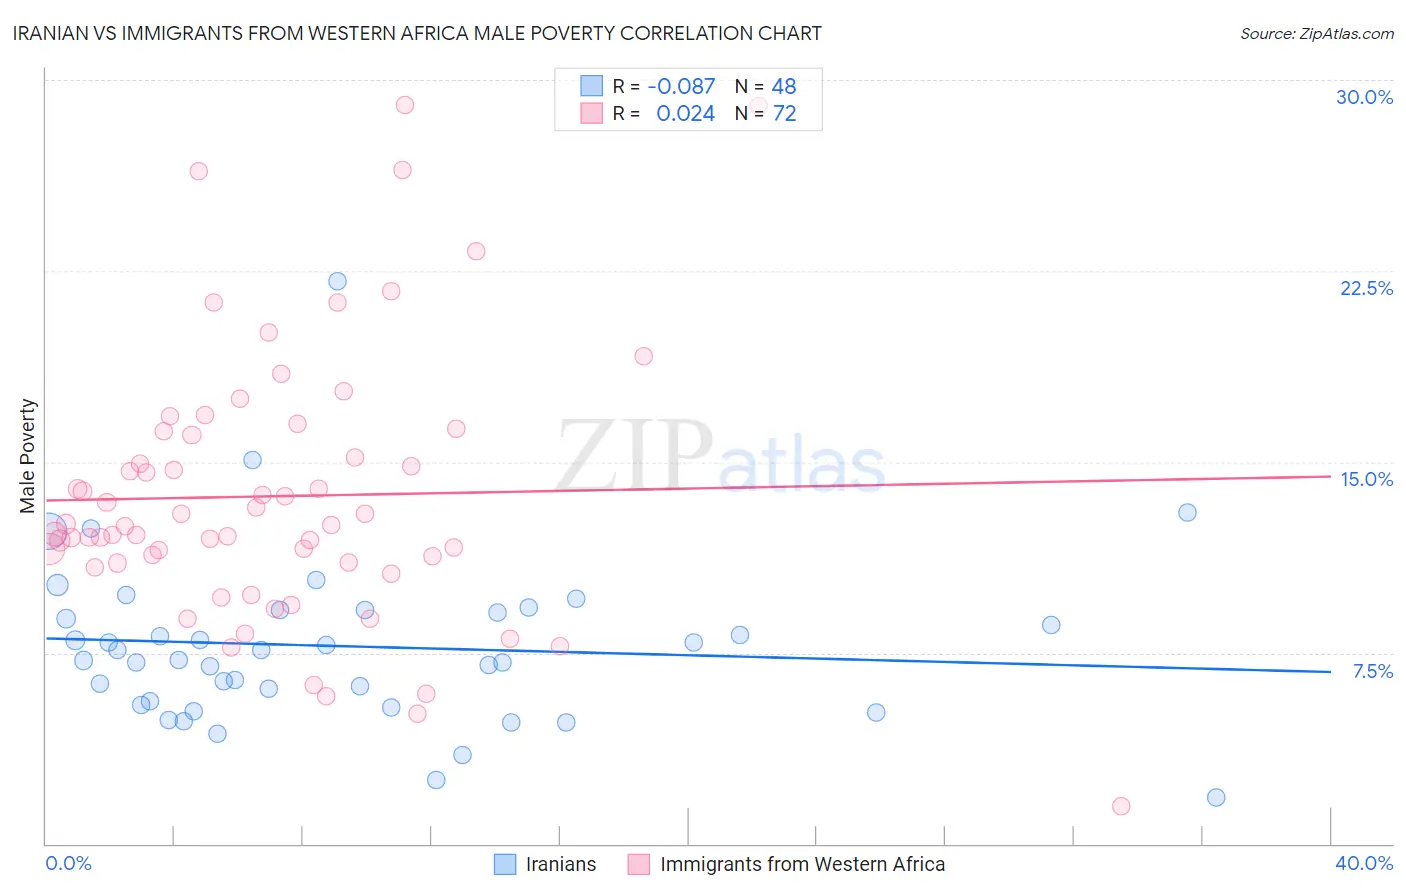 Iranian vs Immigrants from Western Africa Male Poverty